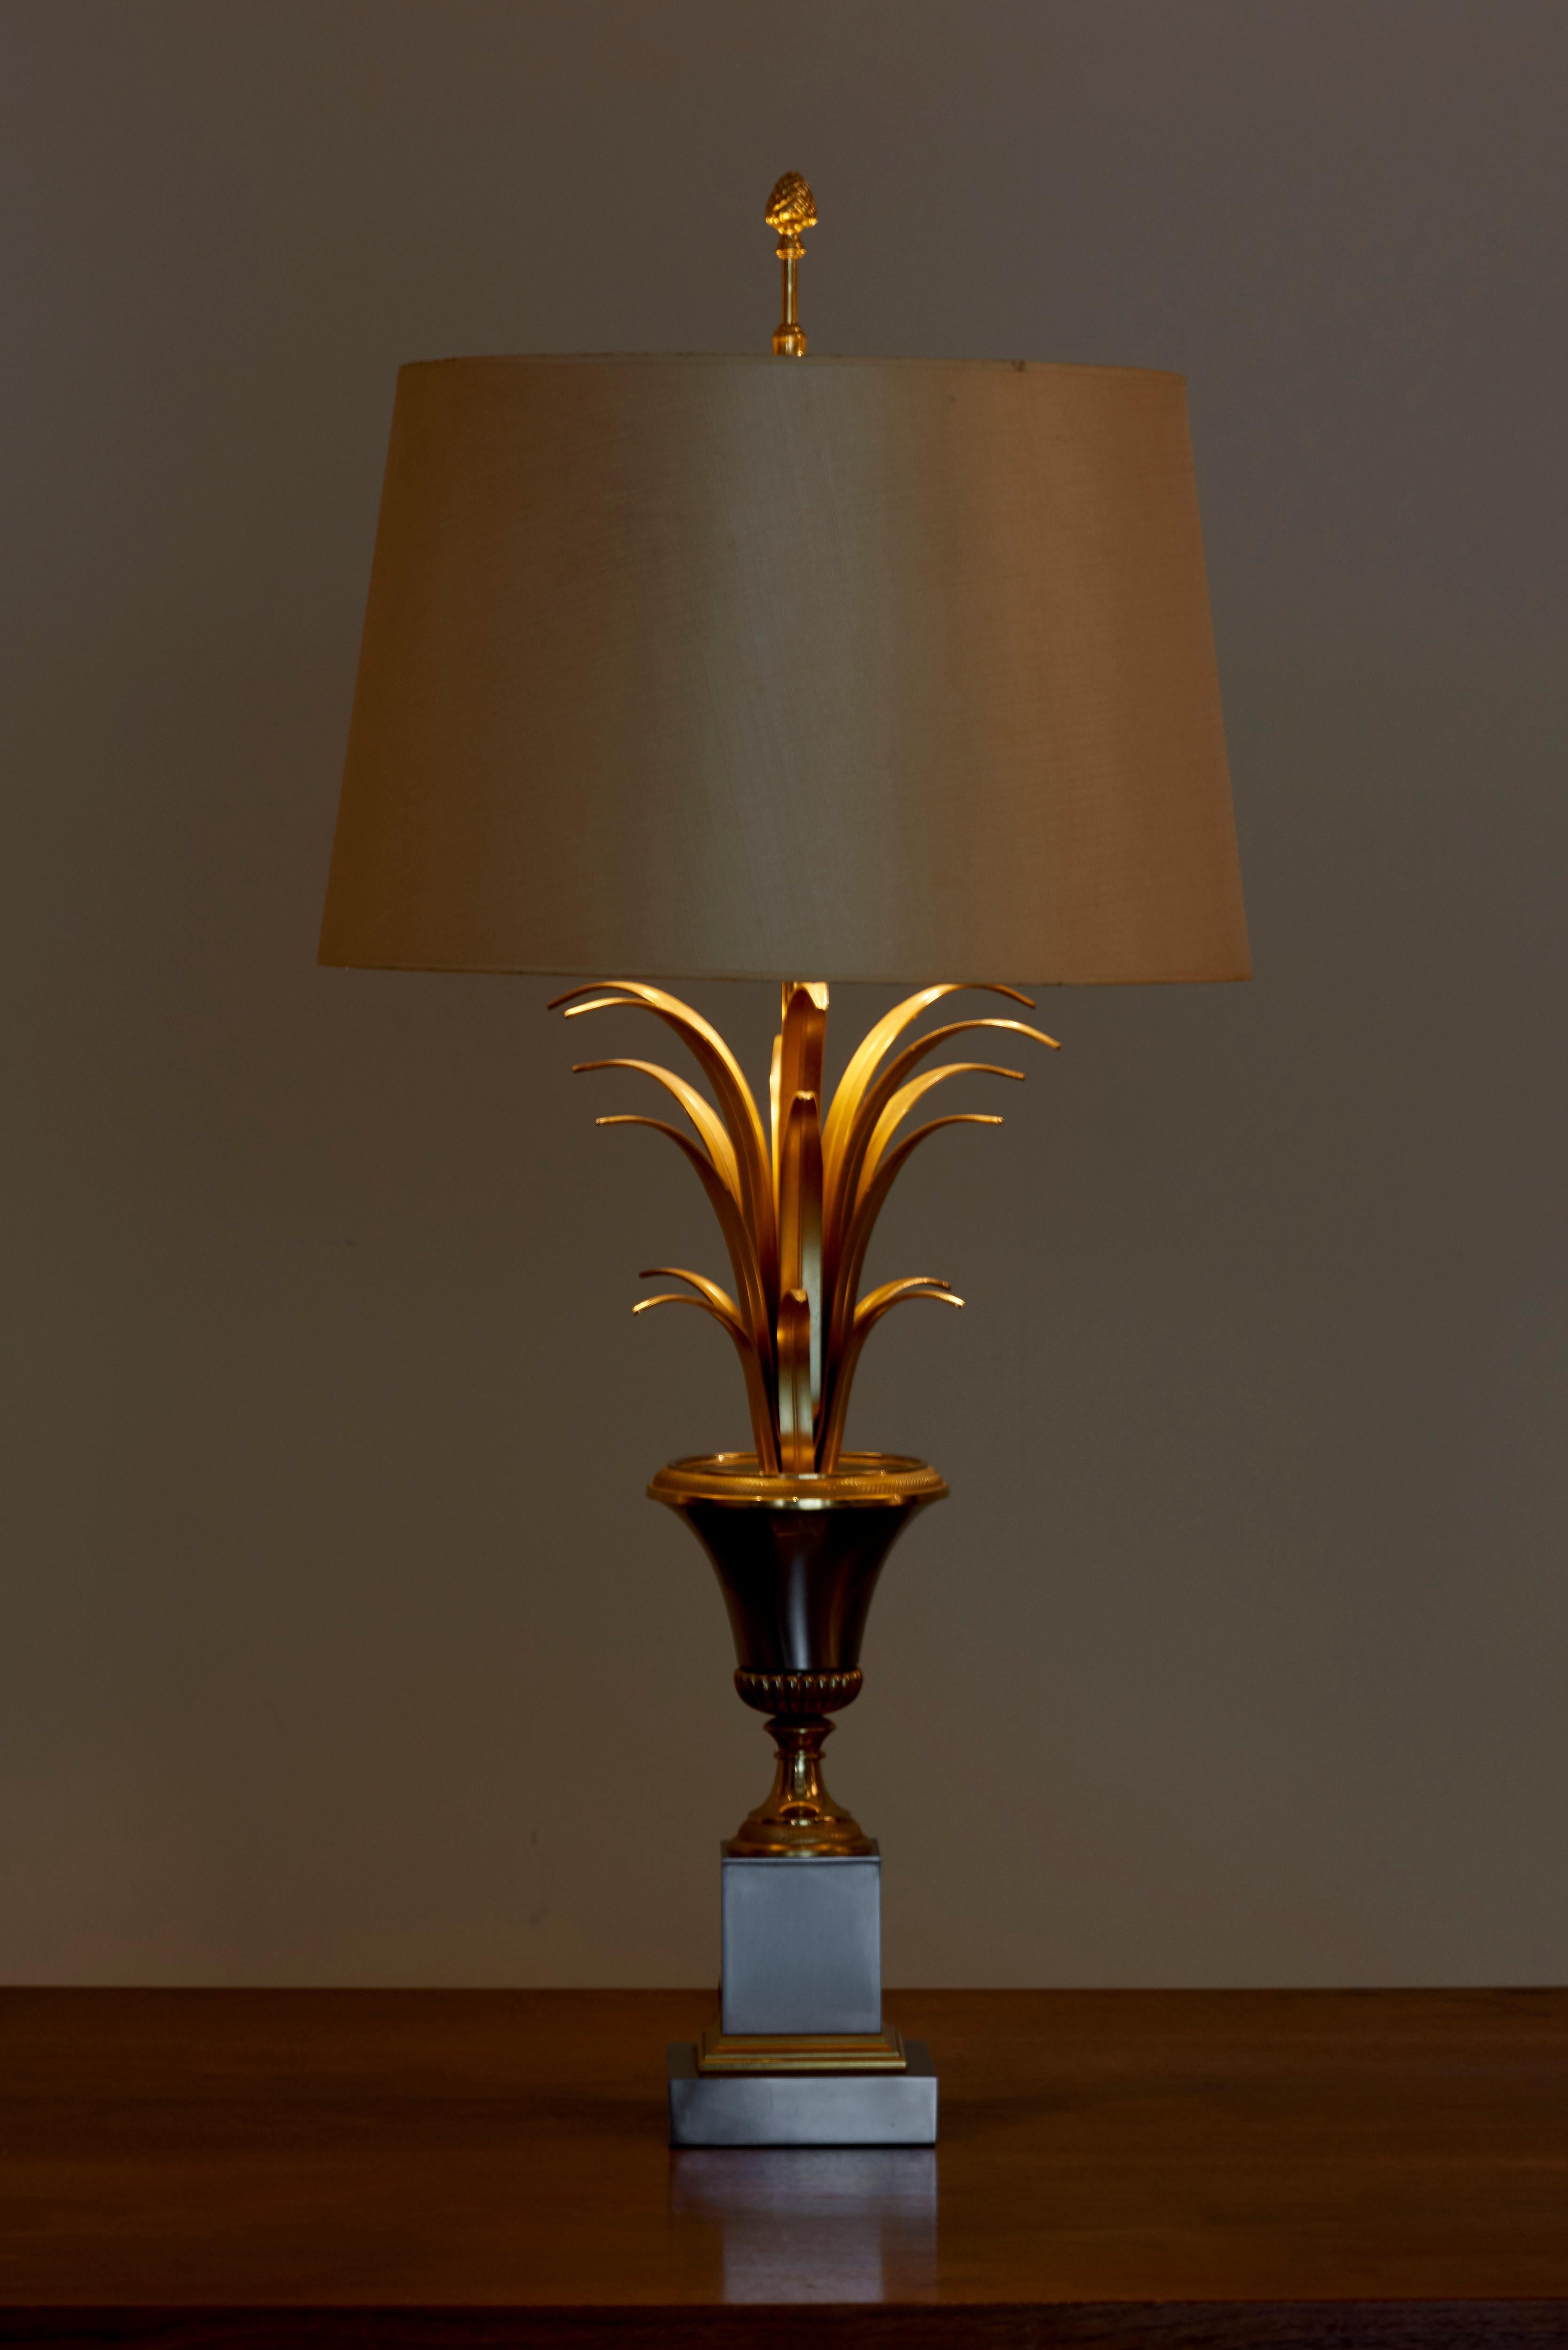 Wonderful, huge Maison Charles table lamp in brass and chrome.
The lamp is in a good vintage condition.
The lamp shade is only for purpose of illustration and doesn´t belong to the lamp.
3 E14 Bulbs.

To be on the safe side, the lamp should be